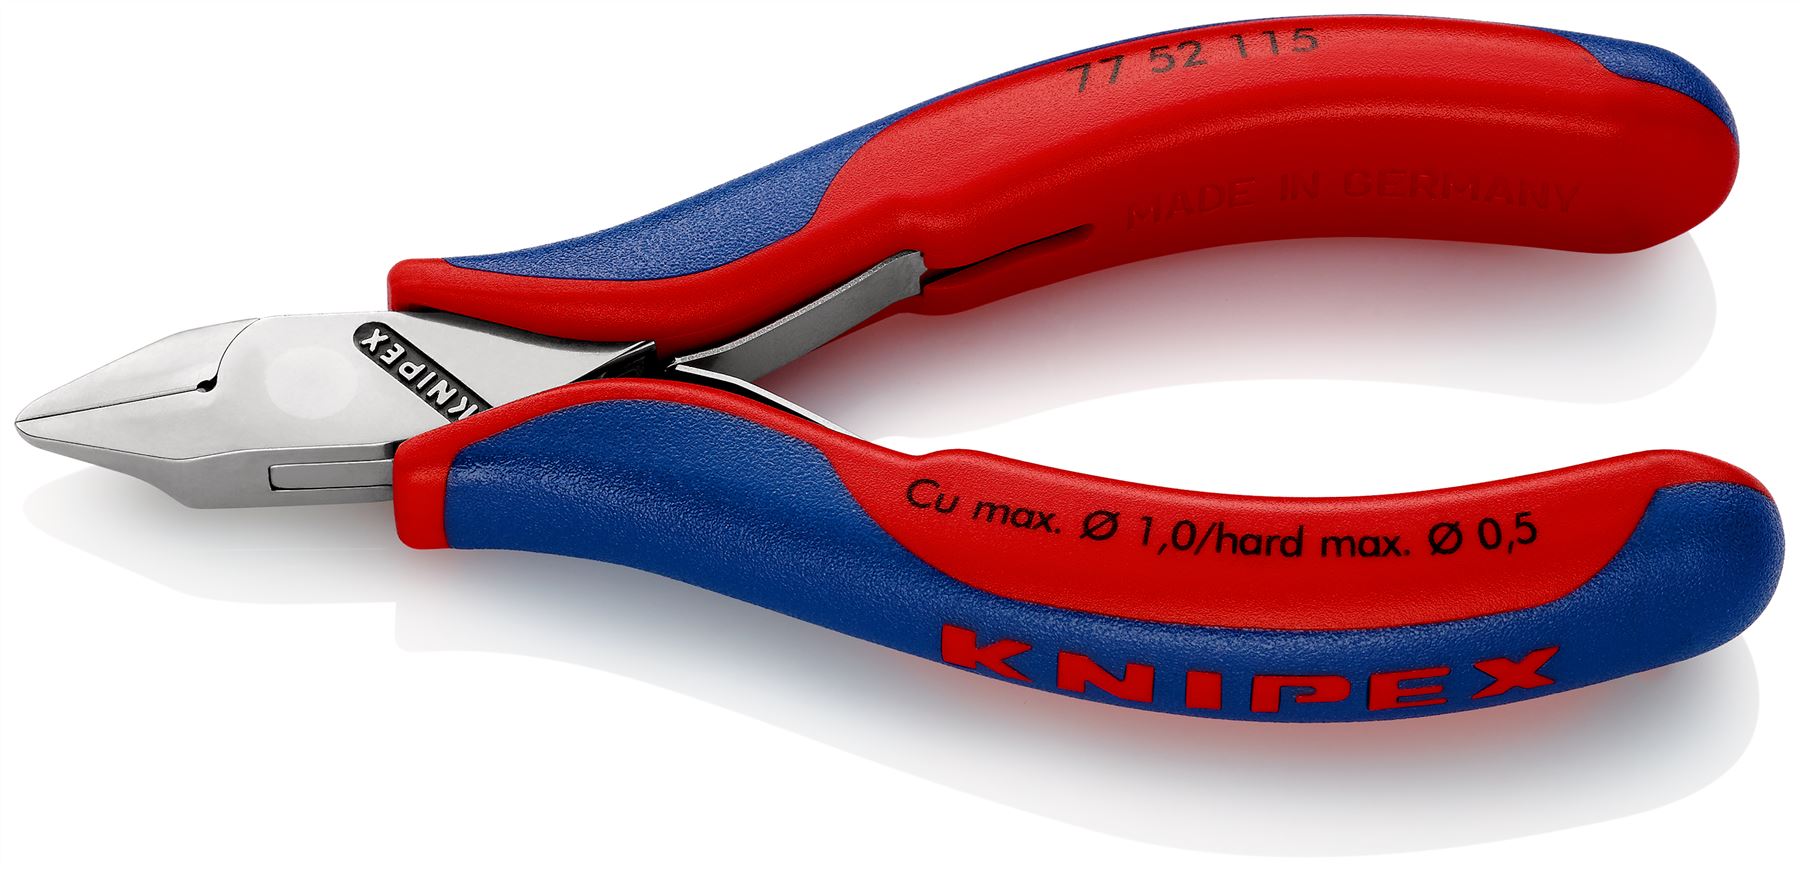 KNIPEX Electronics Diagonal Cutter Pliers Pointed Flat Head Small Bevel 115mm Multi Component Grips 77 52 115